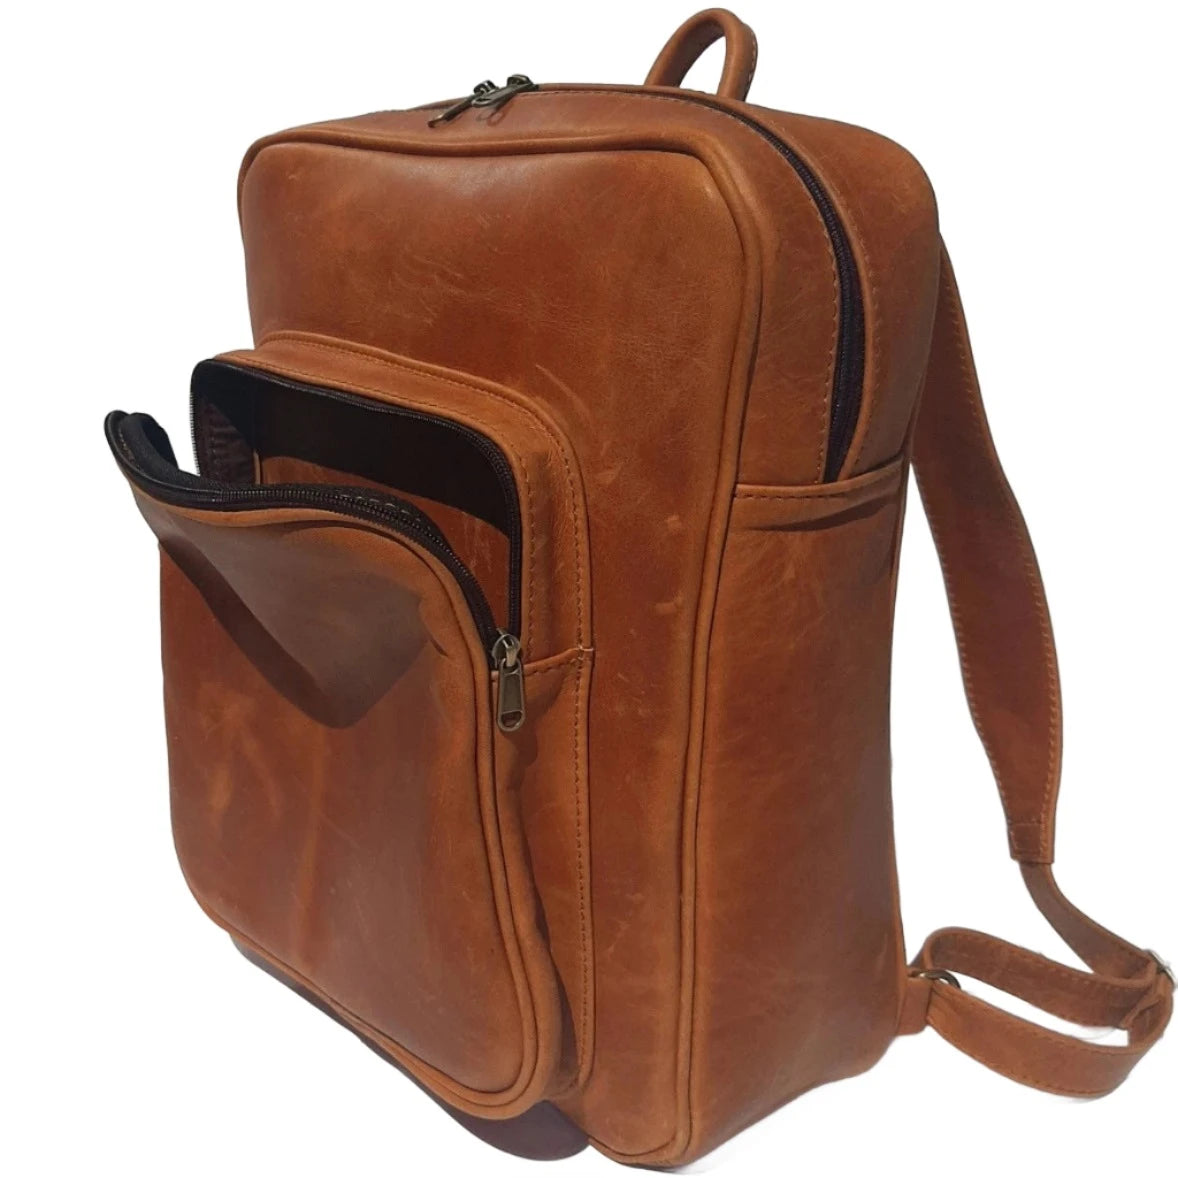 Genuine leather Everyday laptop  backpacks 15" in toffe tan colour Designed by Cape Masai leather. 